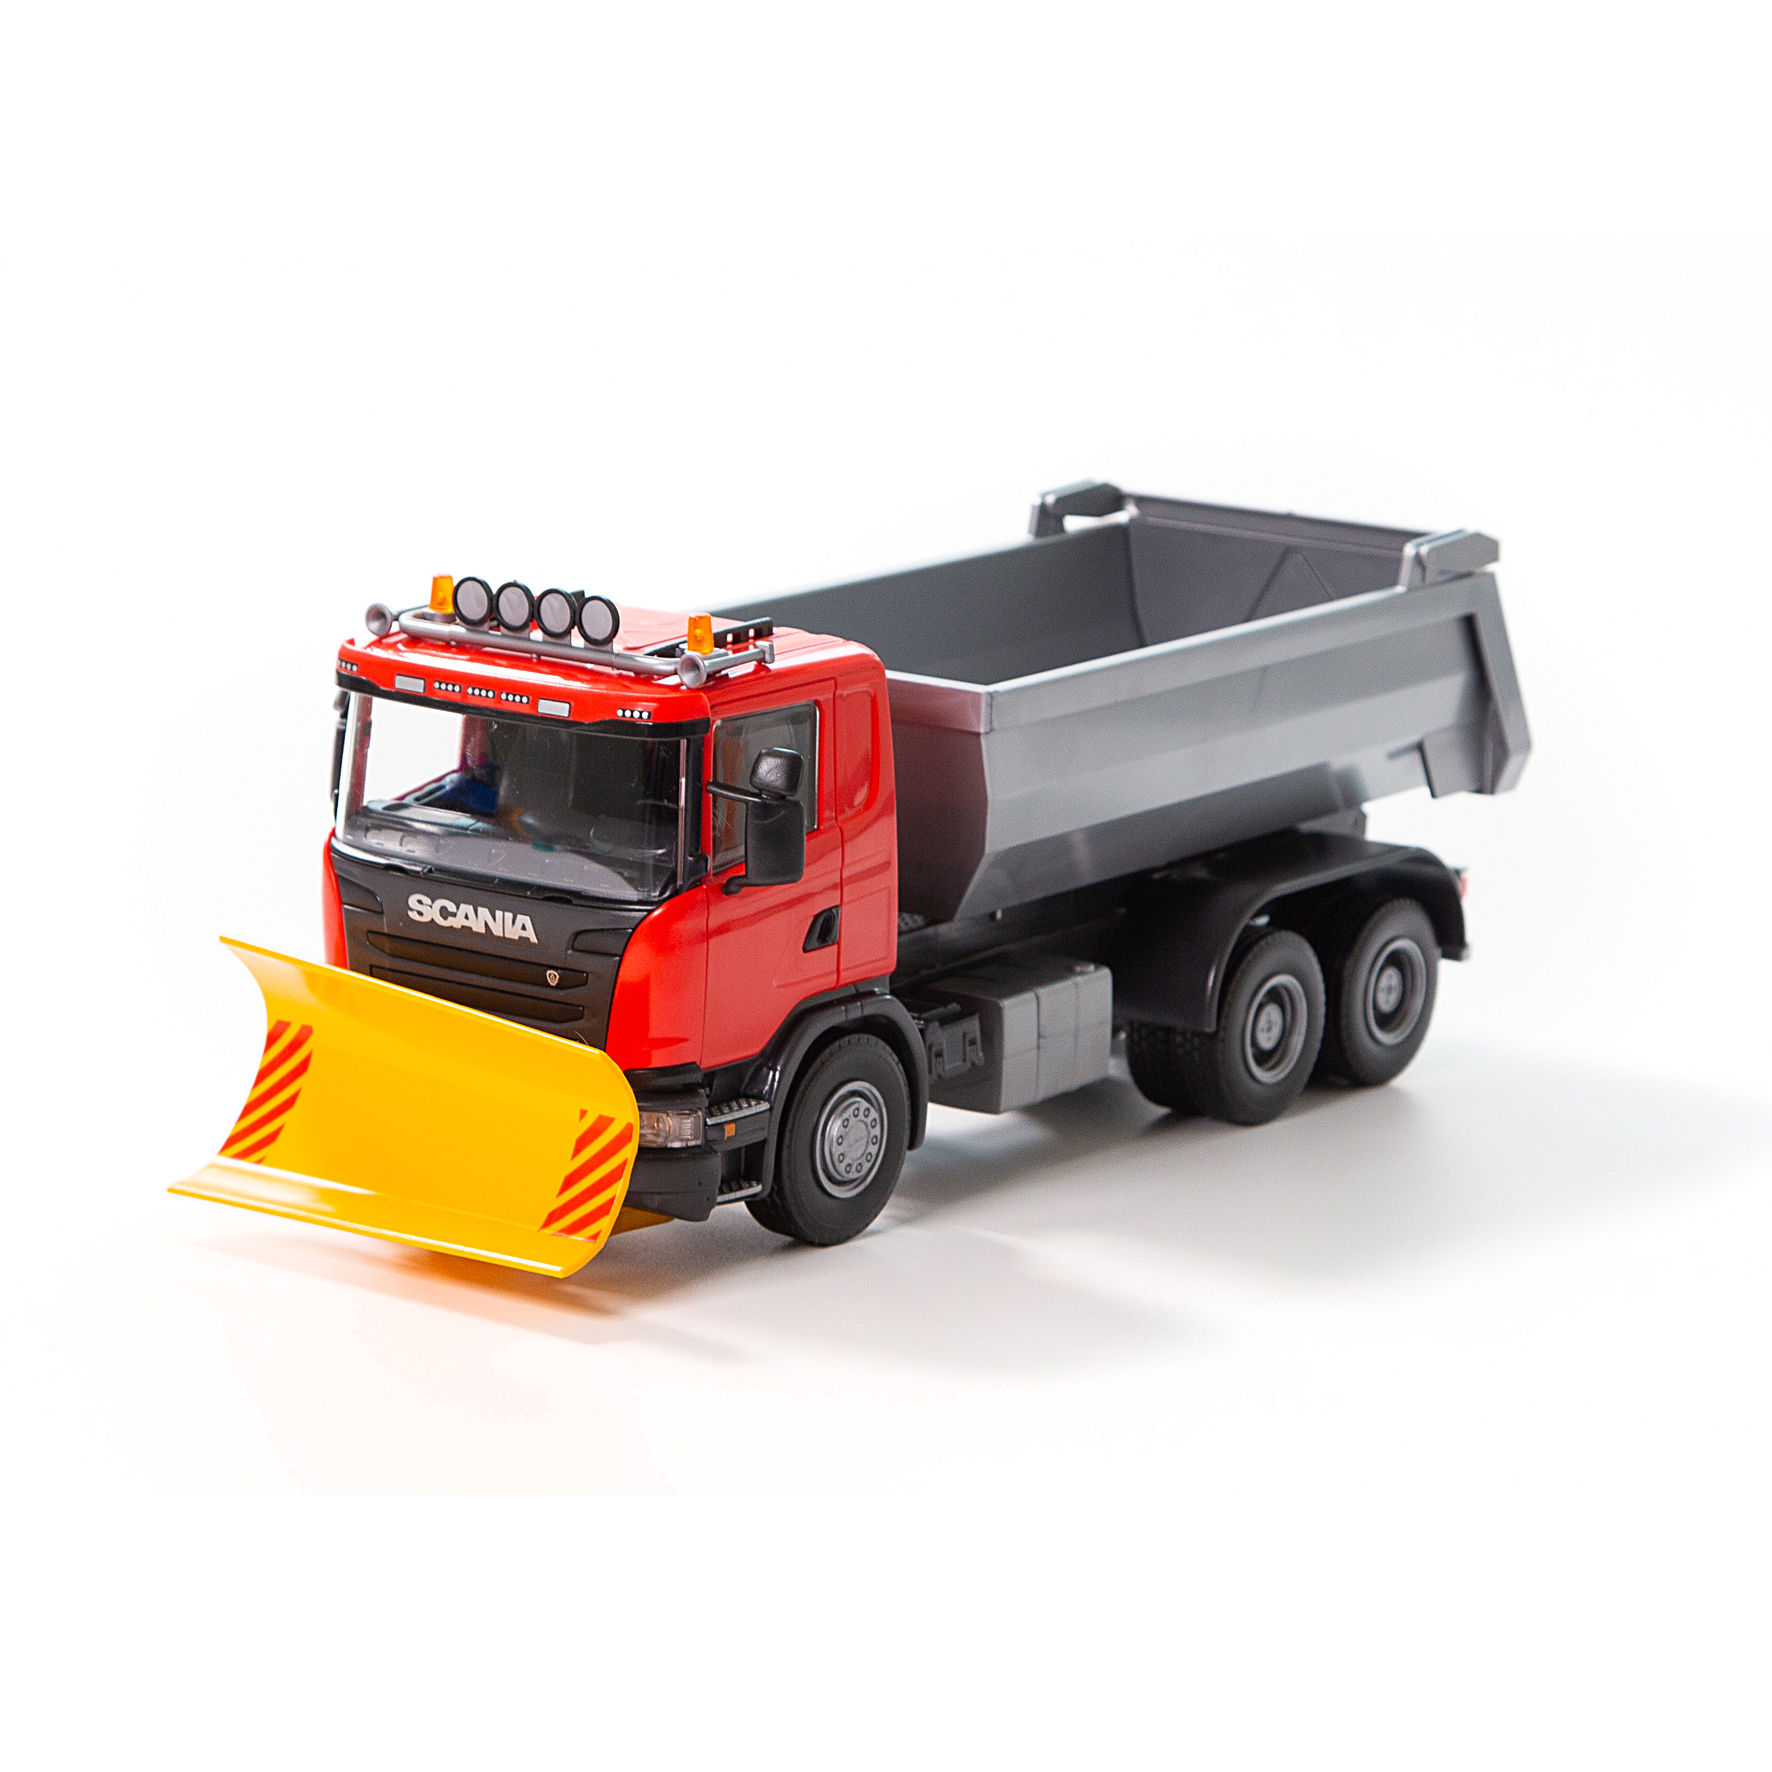 Work Vehicles emek toy car tipper with plow scania red 1:25